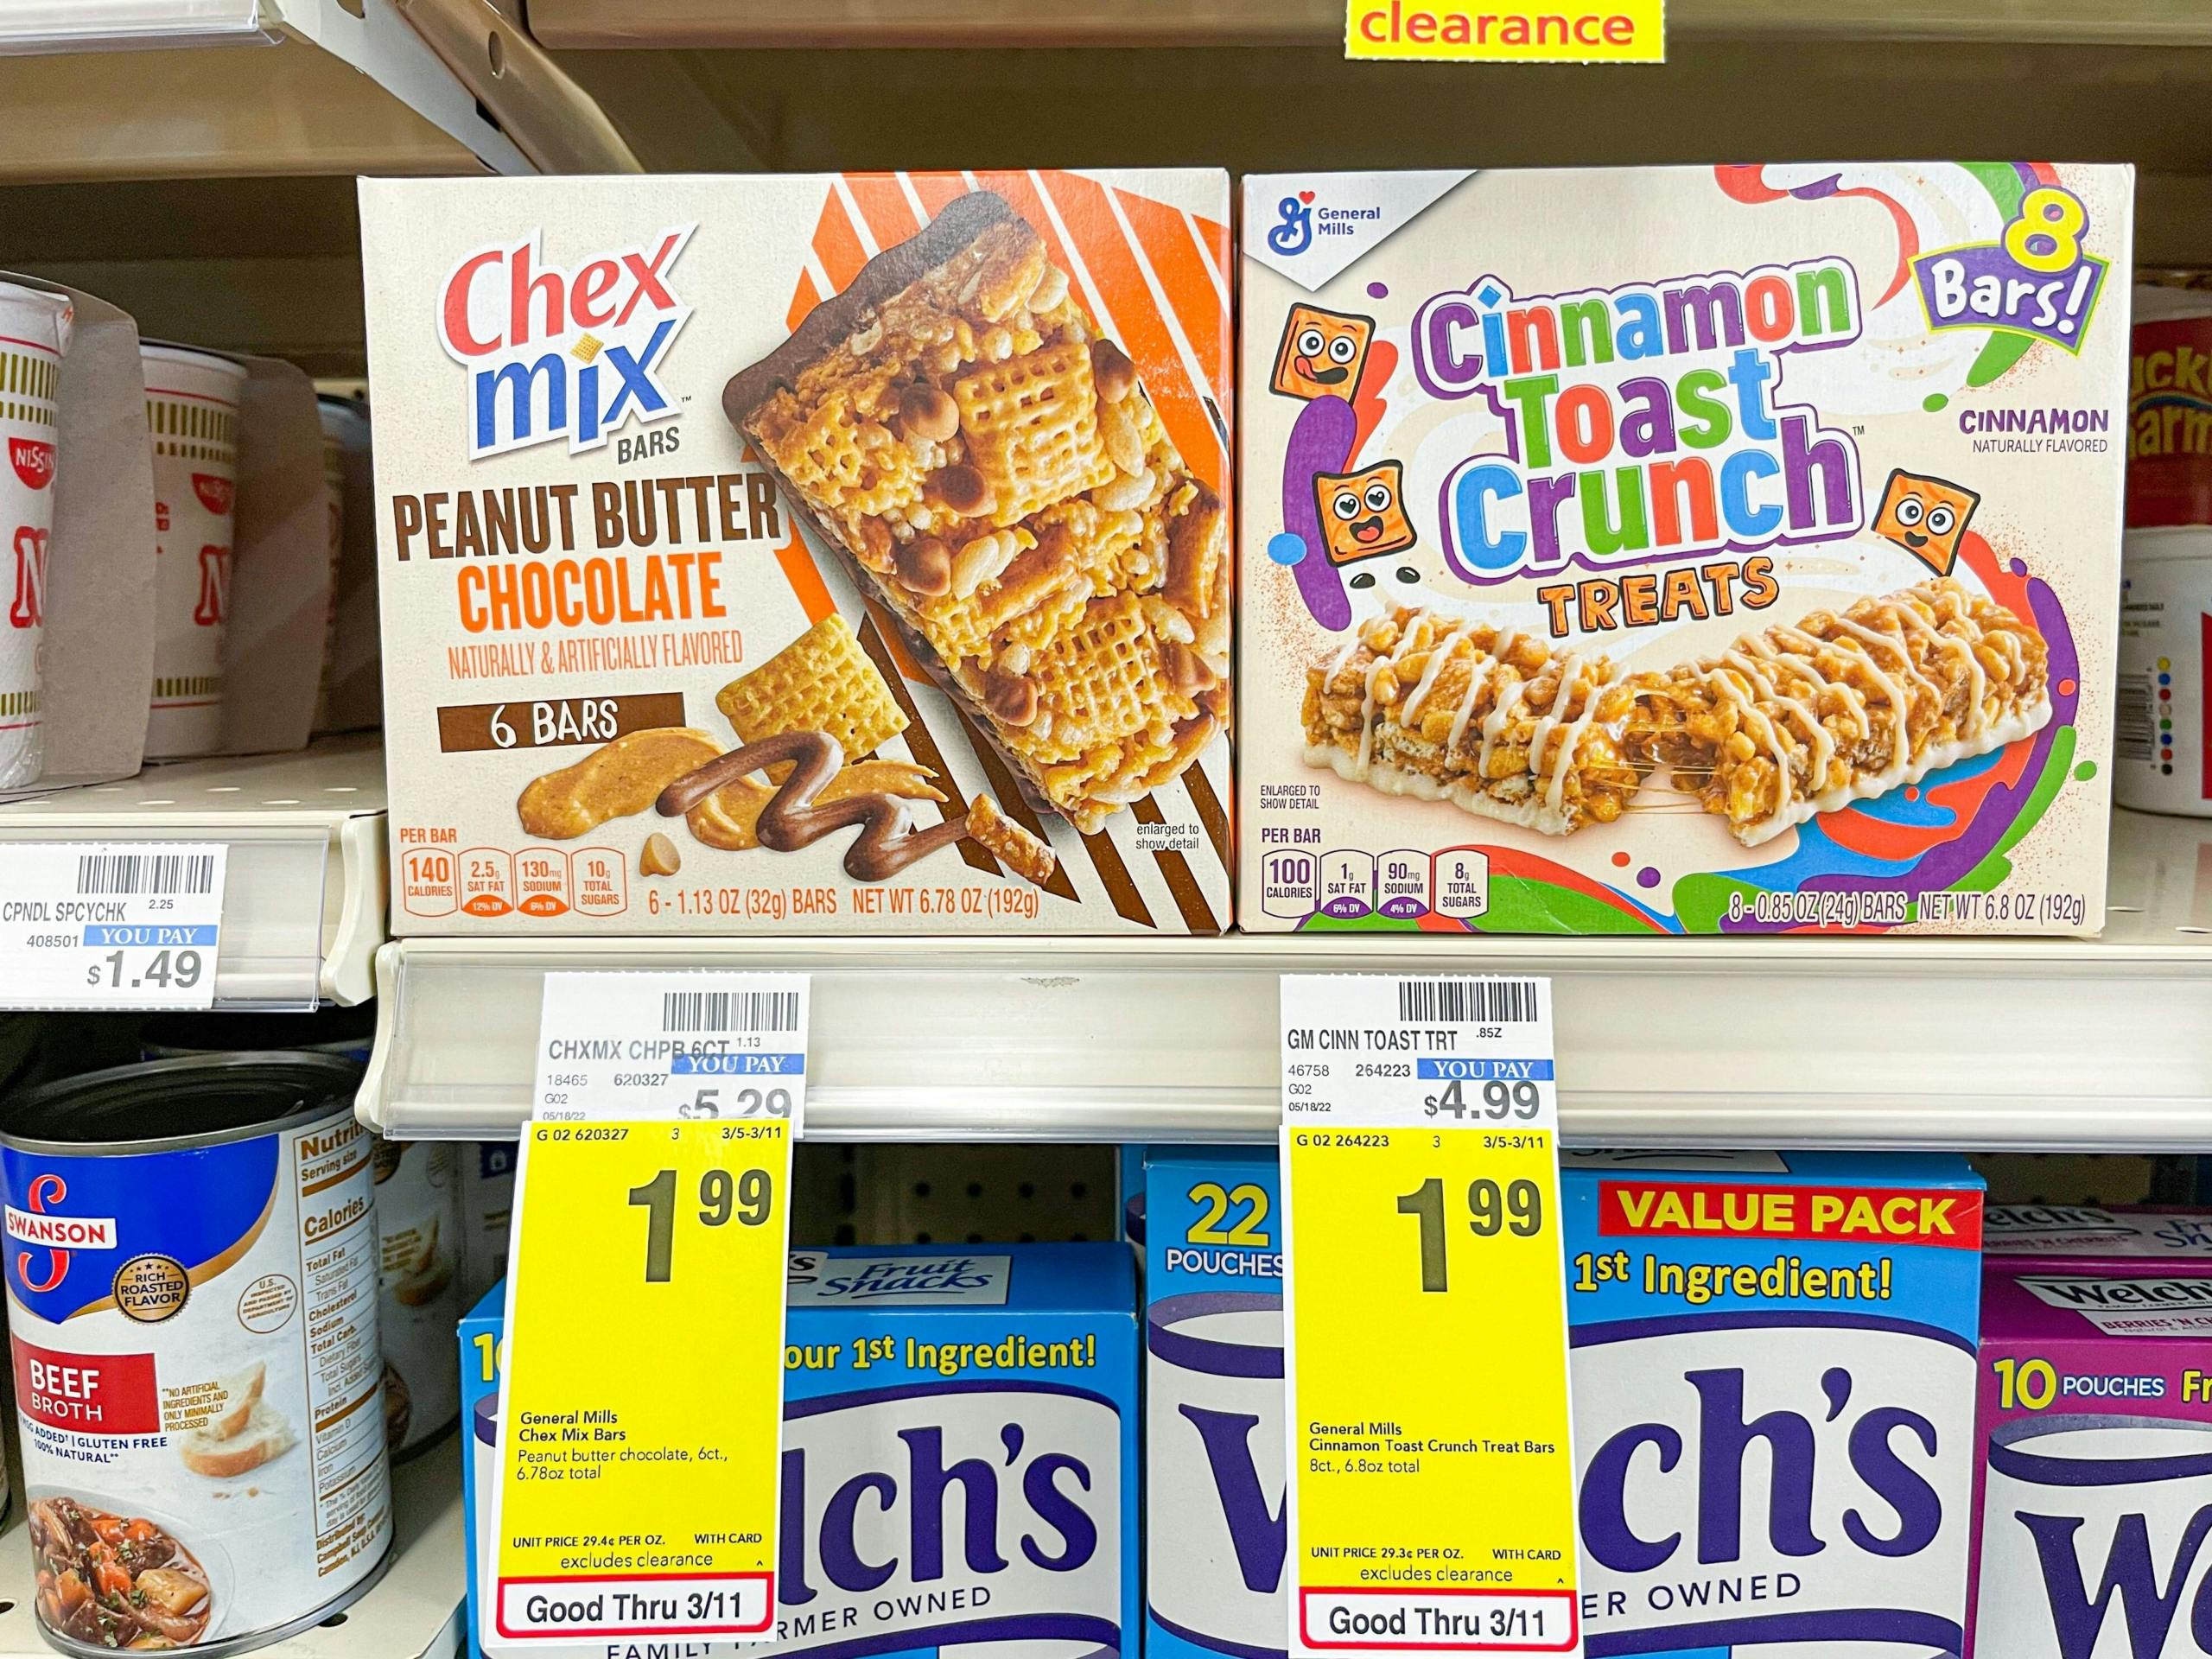 box of Chex Mix and General Mills treats on shelf with sales tag